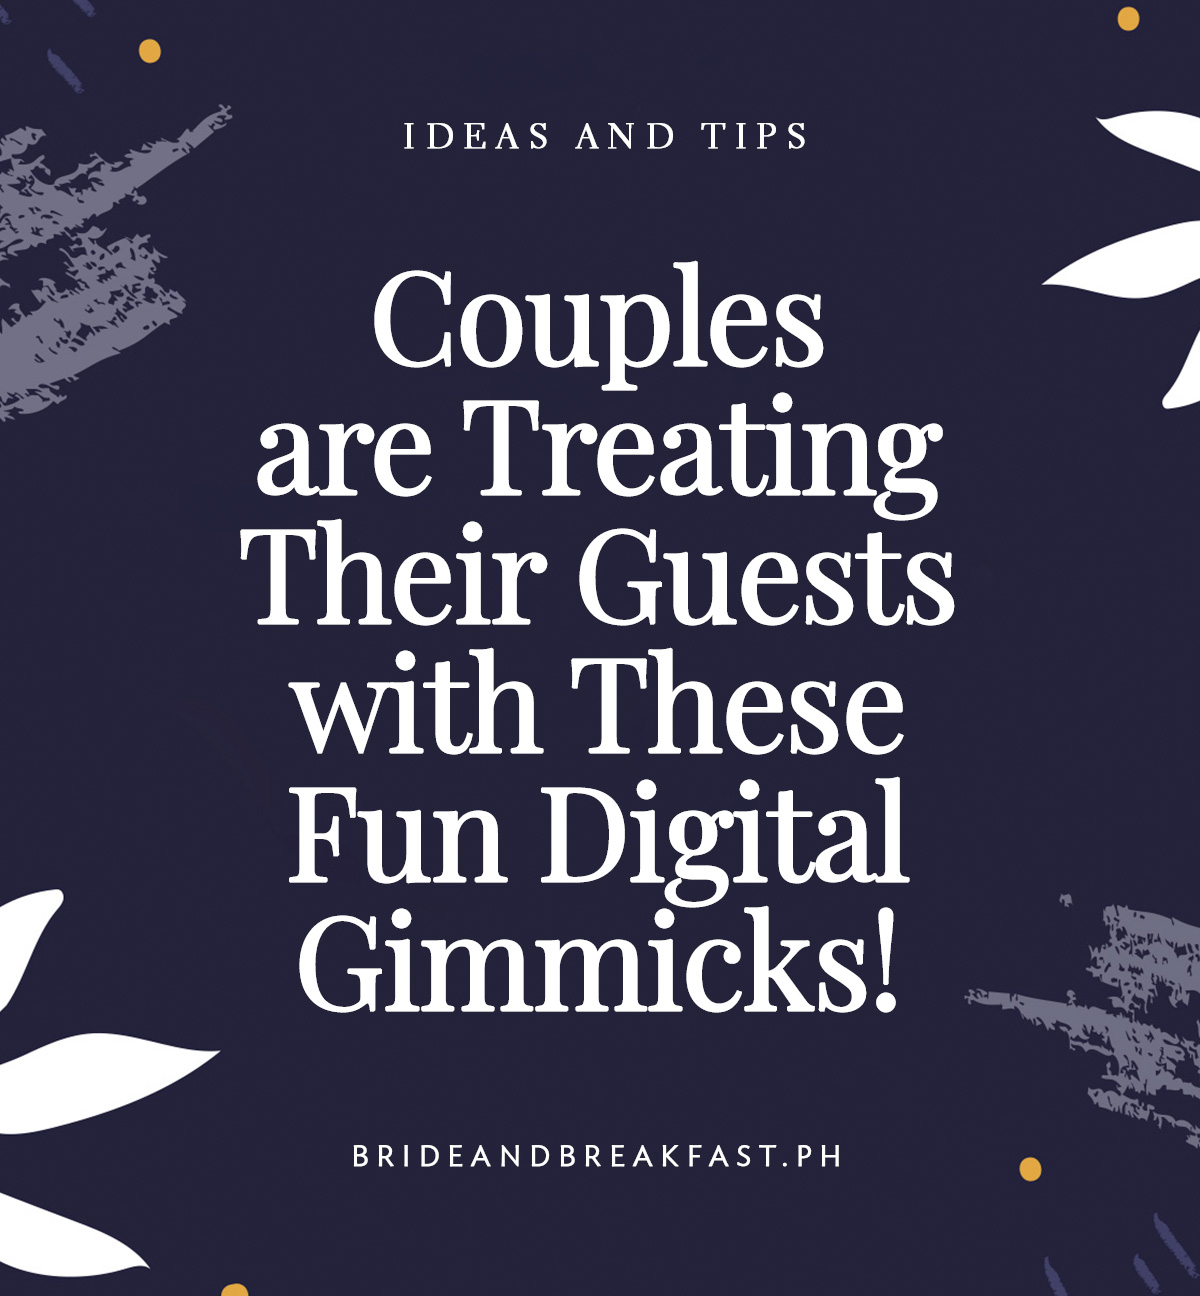 Couples are Treating Their Guests with These Fun Digital Gimmicks!